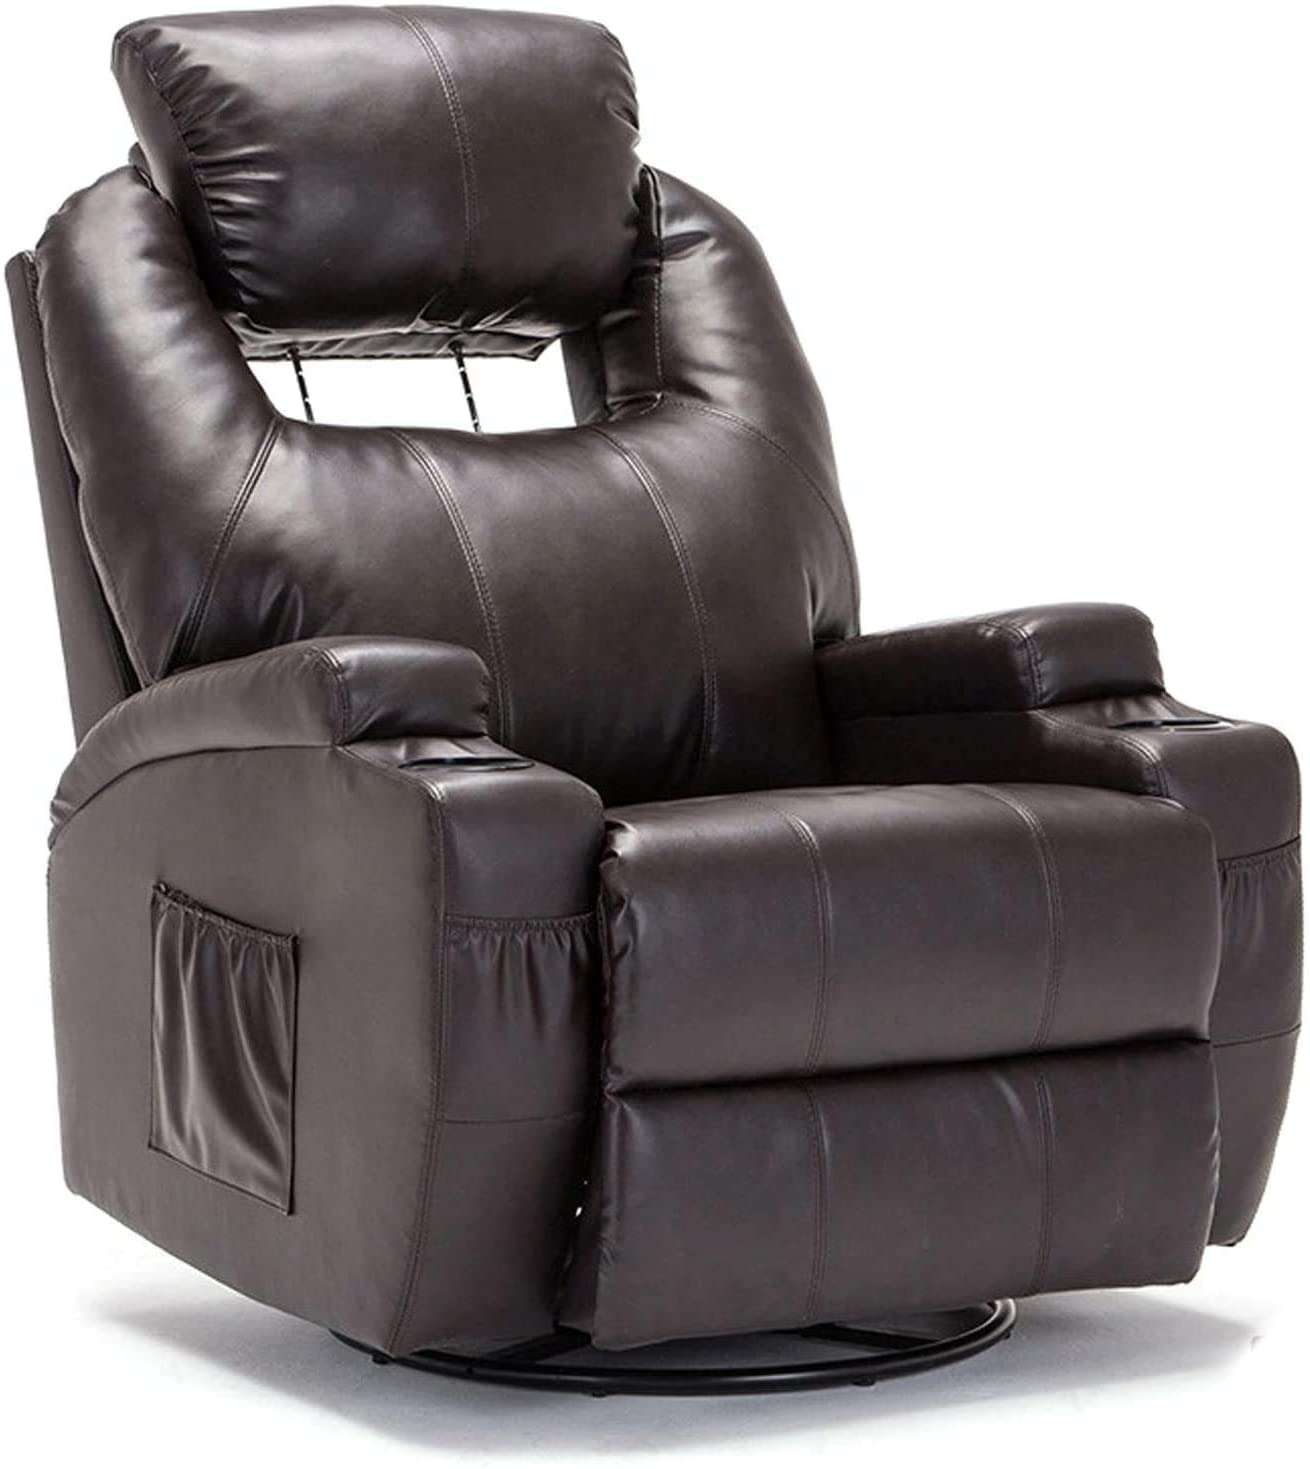 Massage Recliner Chair Bonded Leather Heated Reclining ...